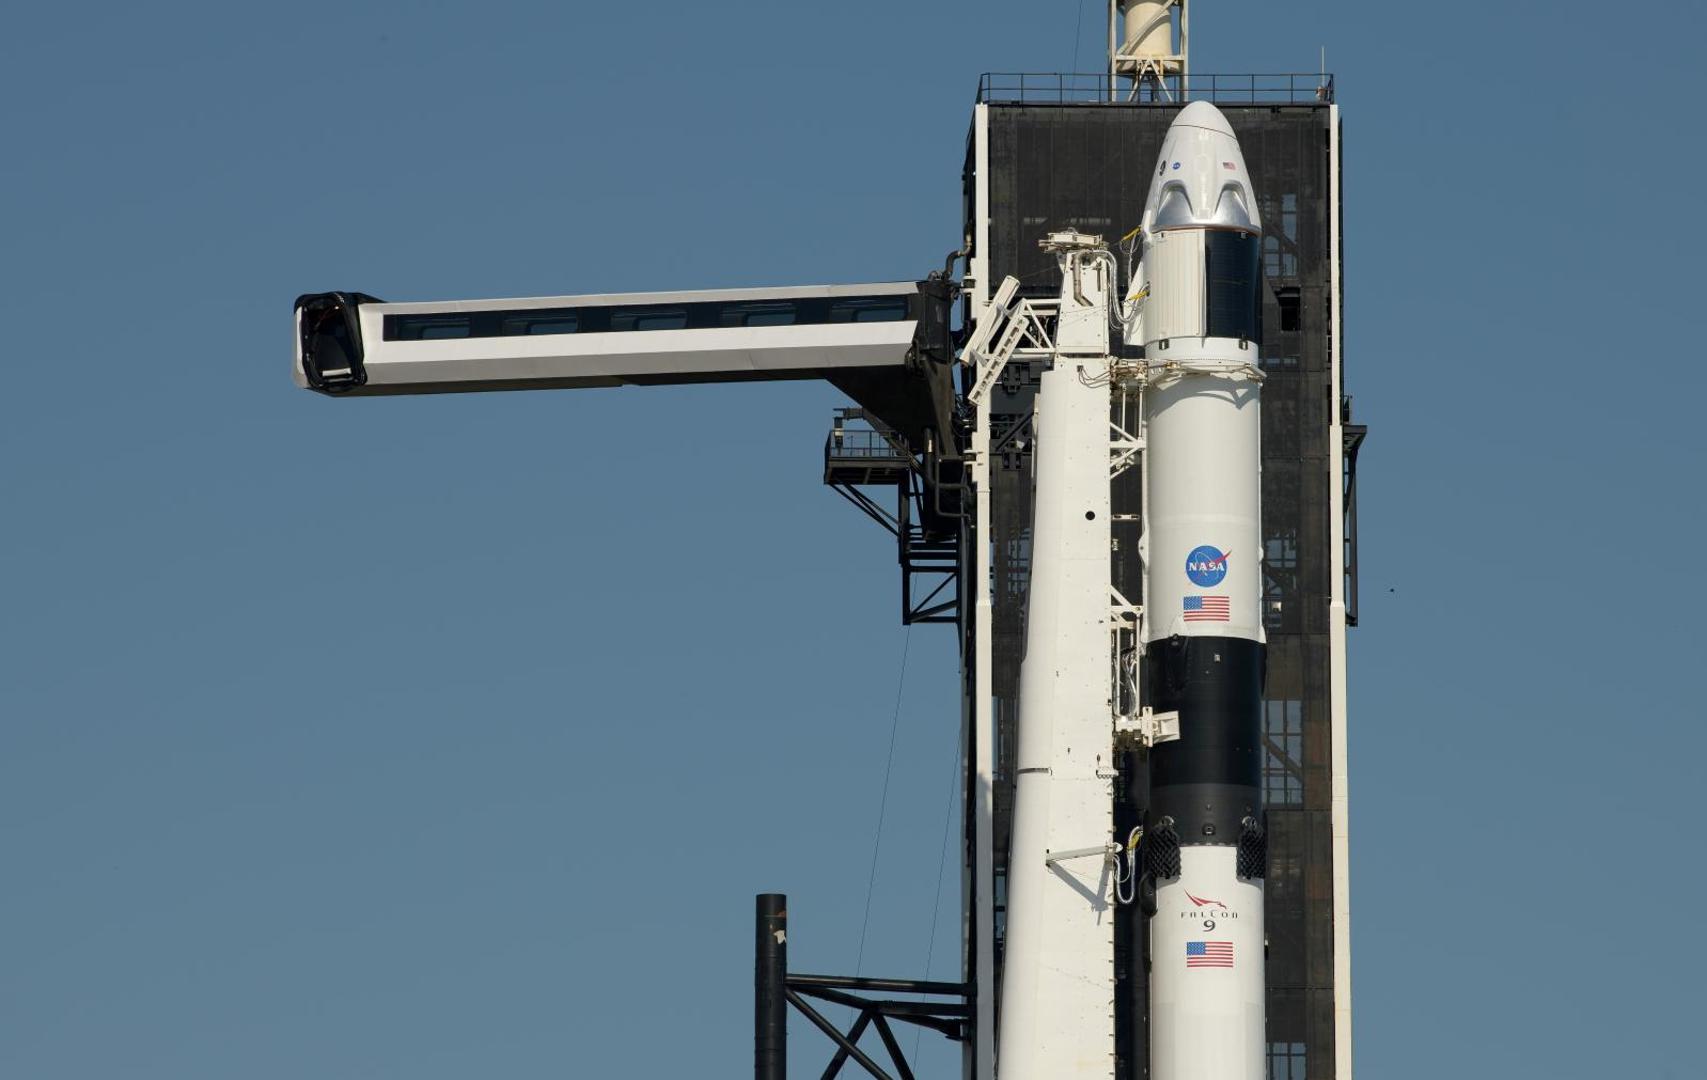 FILE PHOTO: The crew access arm is swung into position to a SpaceX Falcon 9 rocket with the company's Crew Dragon spacecraft onboard FILE PHOTO: The crew access arm is swung into position to a SpaceX Falcon 9 rocket with the company's Crew Dragon spacecraft onboard on the launch pad at Launch Complex 39A at NASA’s Kennedy Space Center as preparations continue for the Demo-2 mission to the International Space Station, in Cape Canaveral, Florida, U.S. May 21, 2020.  NASA/Bill Ingalls/Handout via REUTERS.  THIS IMAGE HAS BEEN SUPPLIED BY A THIRD PARTY. MANDATORY CREDIT/File Photo NASA NASA